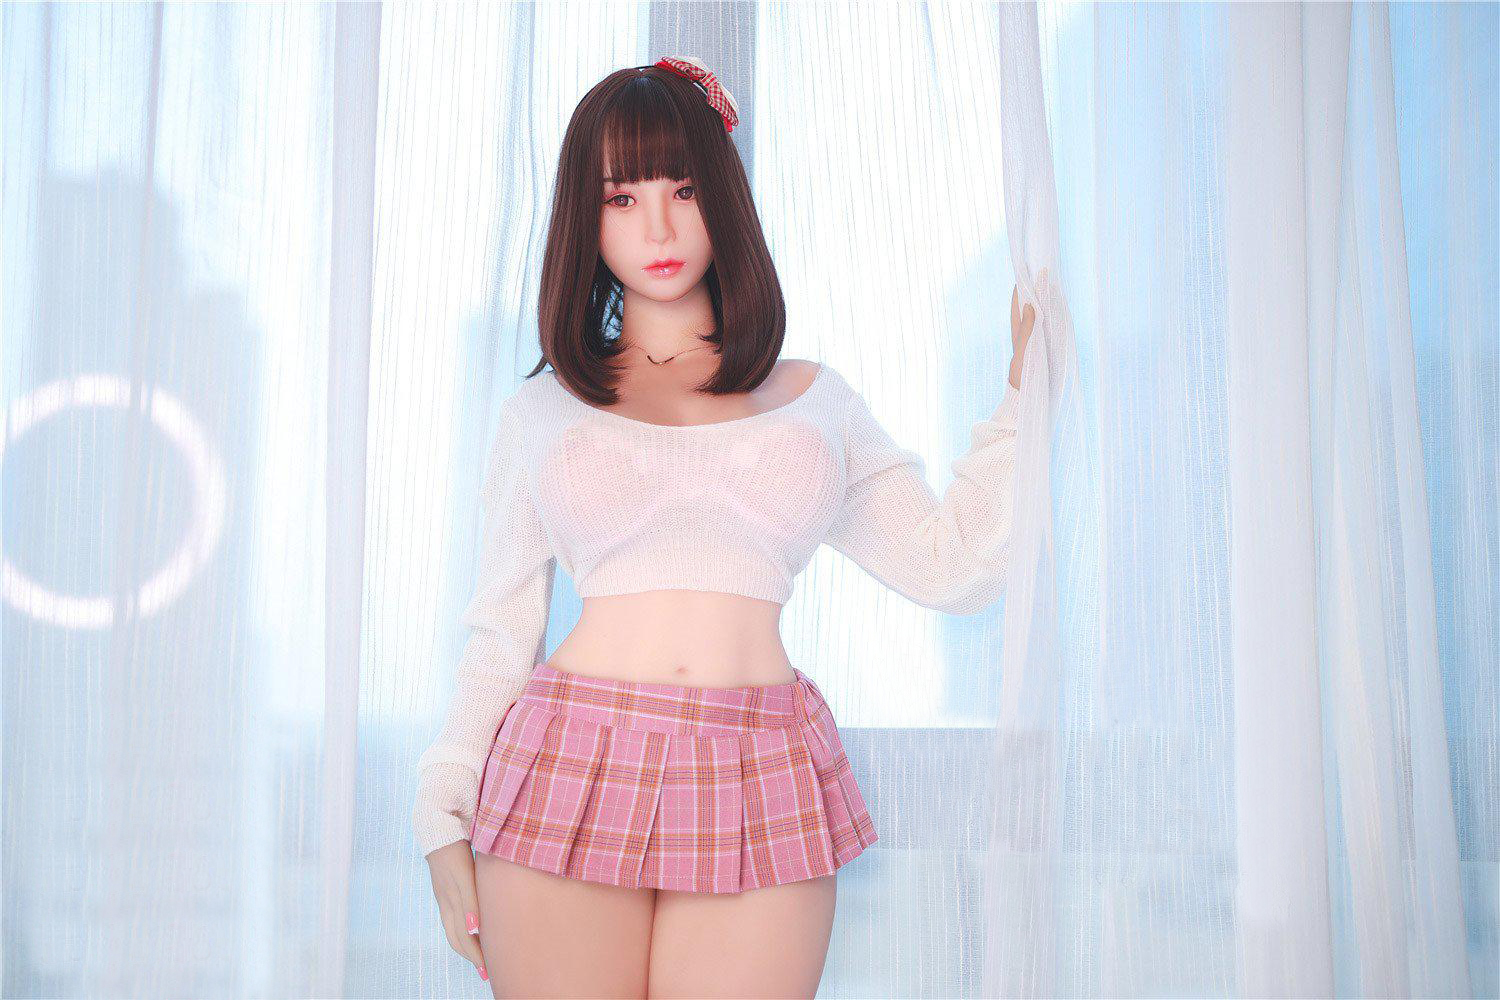 Ling-Juicy-Asian-Sex-Doll-38